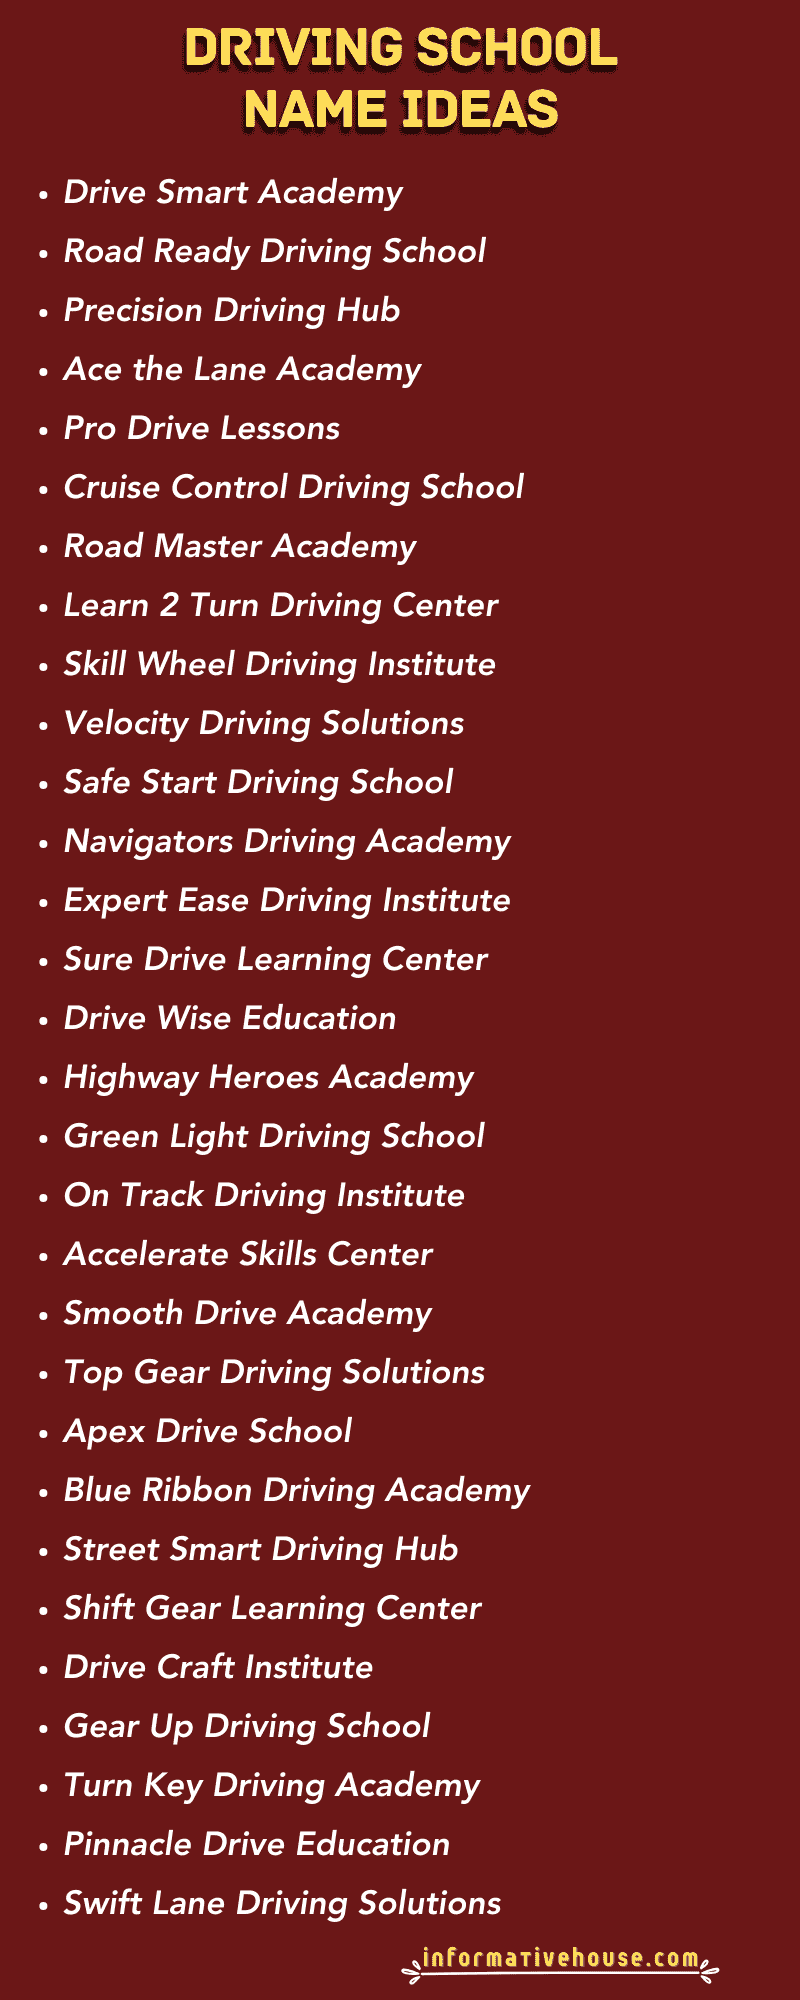 Driving School Name Ideas for startup